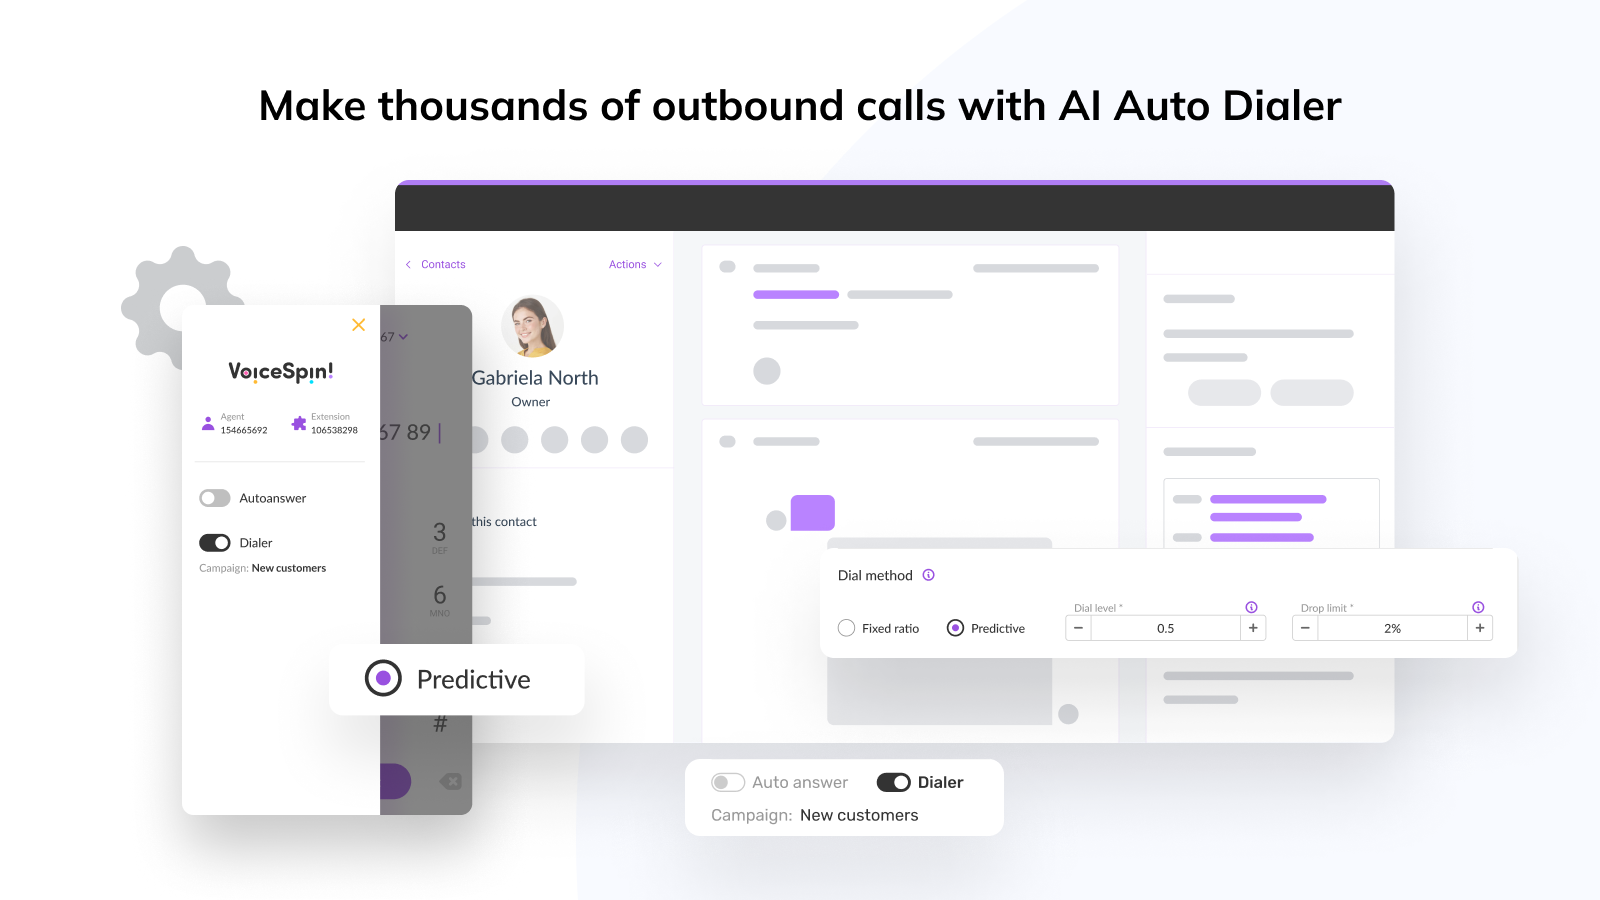 Make thousands of outbound calls with AI Auto Dialer